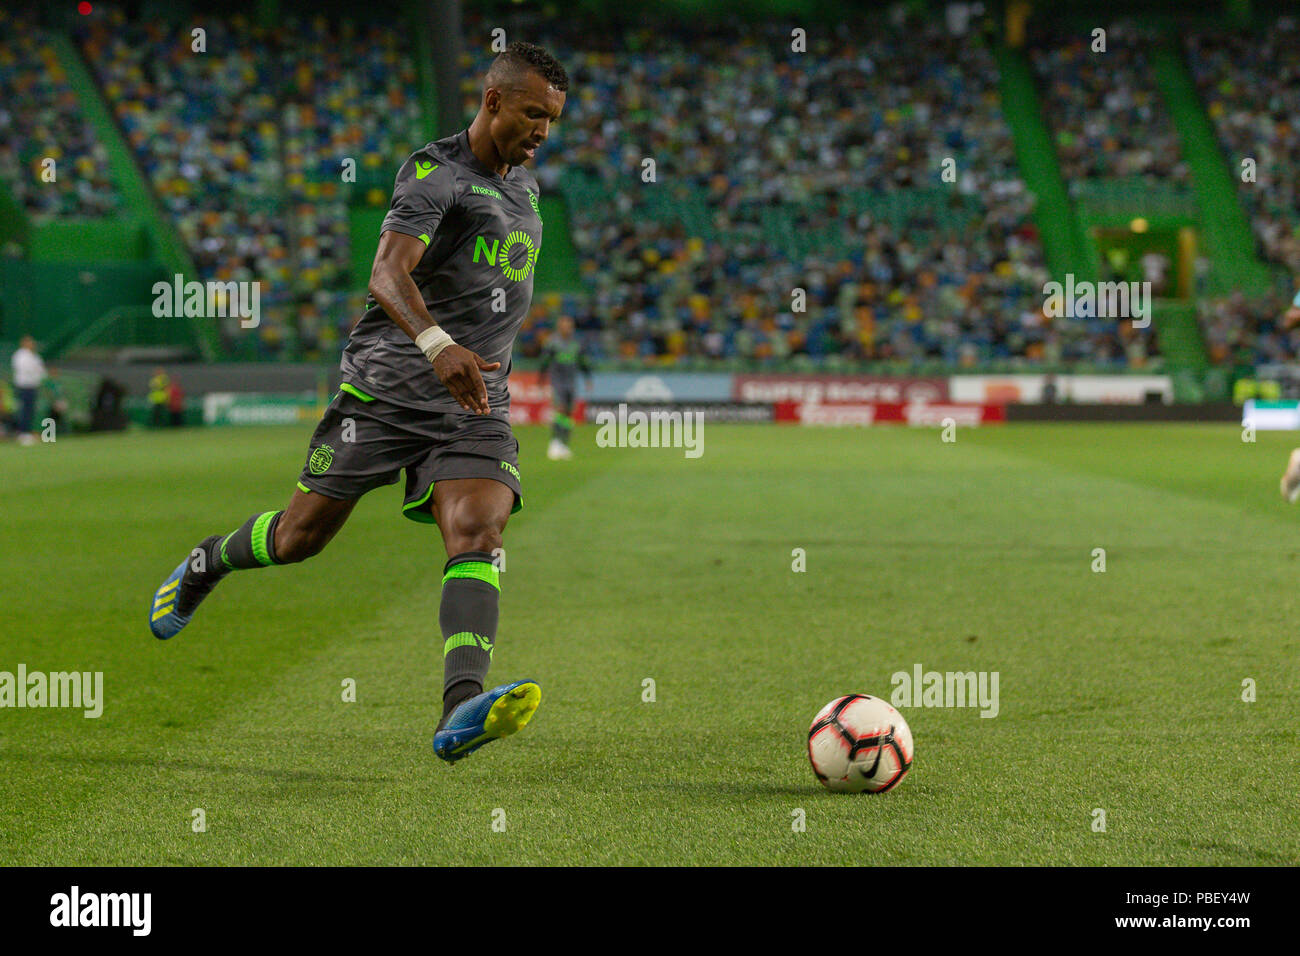 July 28, 2018. Lisbon, Portugal. Sporting's forward from Portugal Nani (17) in action during the game Sporting CP v Olympique de Marseille © Alexandre de Sousa/Alamy Live News Stock Photo